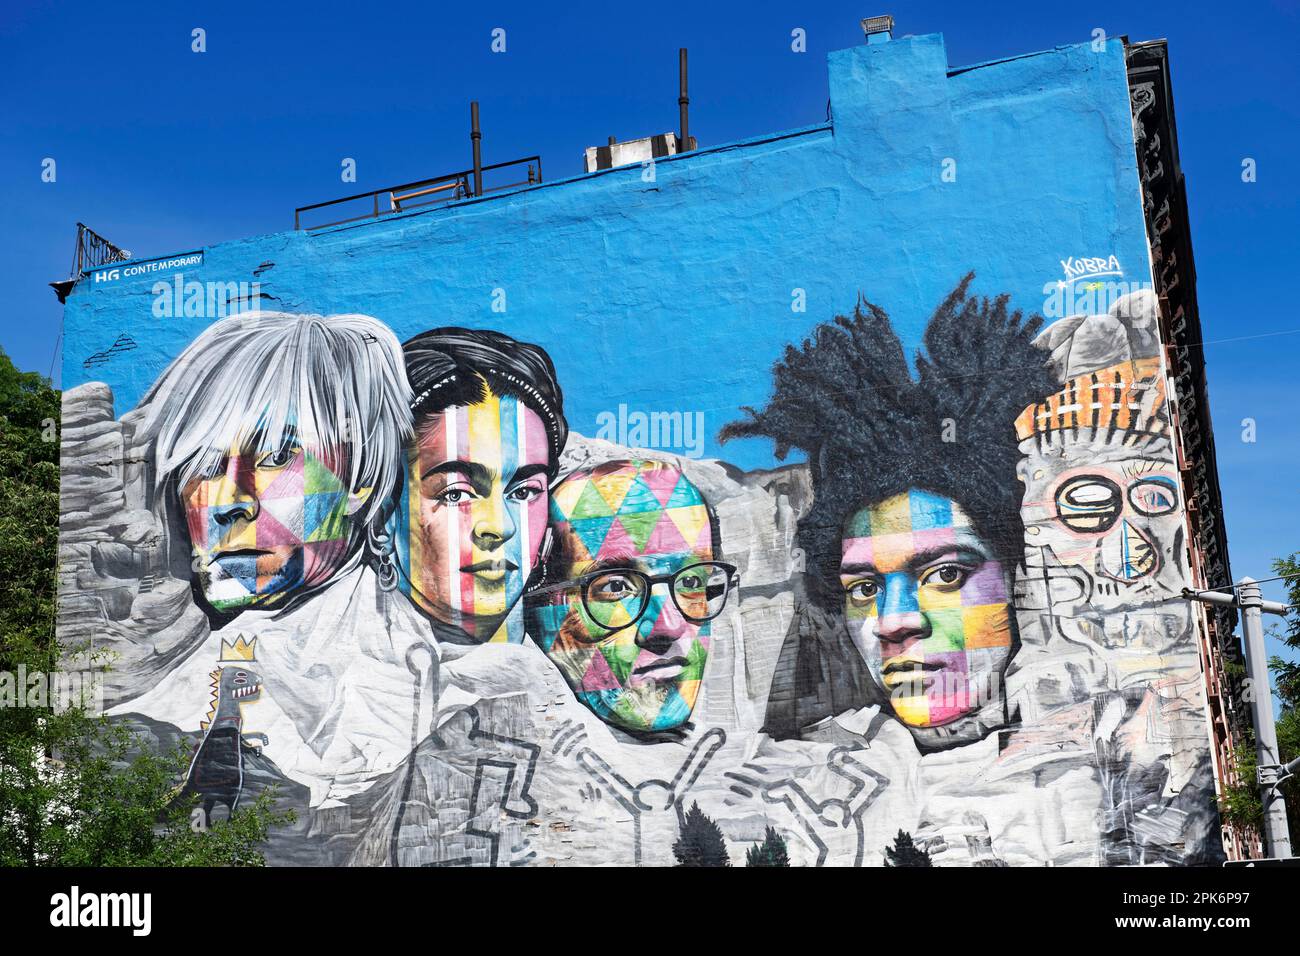 W 22 St, 10th Ave Murale avec Andy Warhol, Frida Kahlo, Keith Haring, J.M. Basquiat, Manhattan, New York, États-Unis Banque D'Images